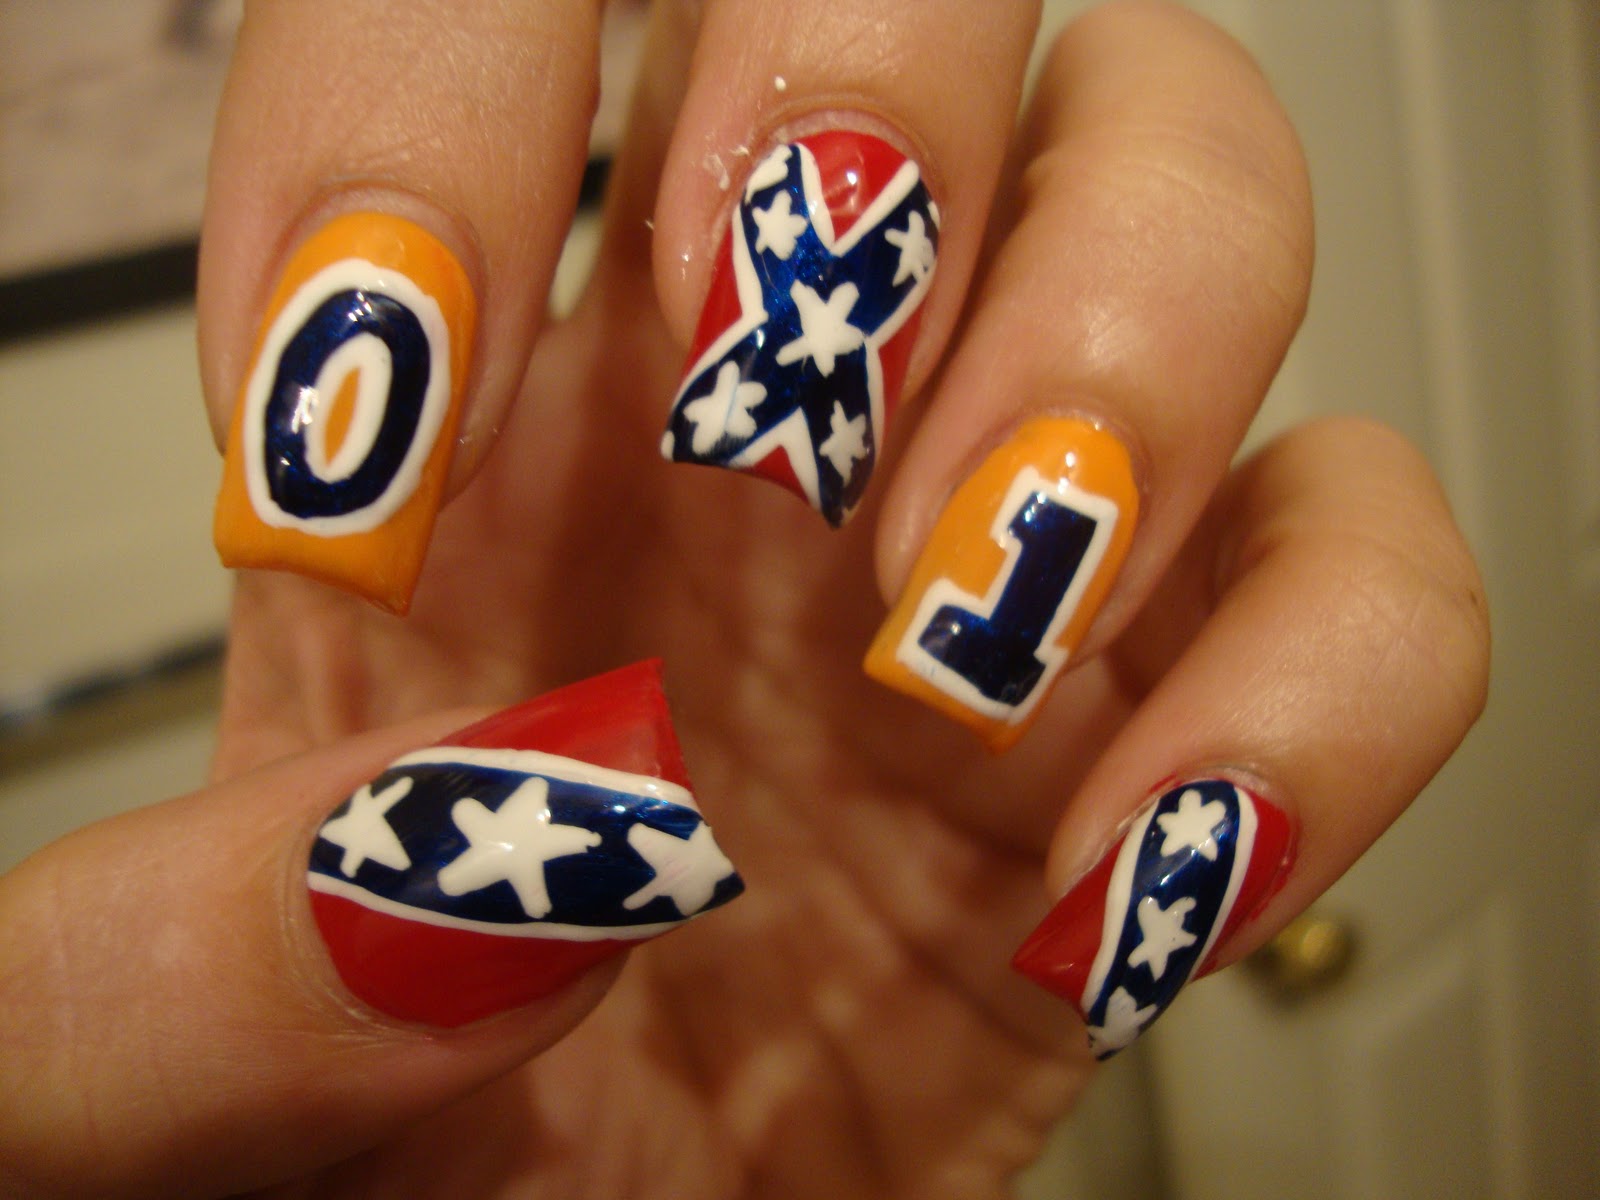 Confederate Flag Nail Designs for Short Nails - wide 6